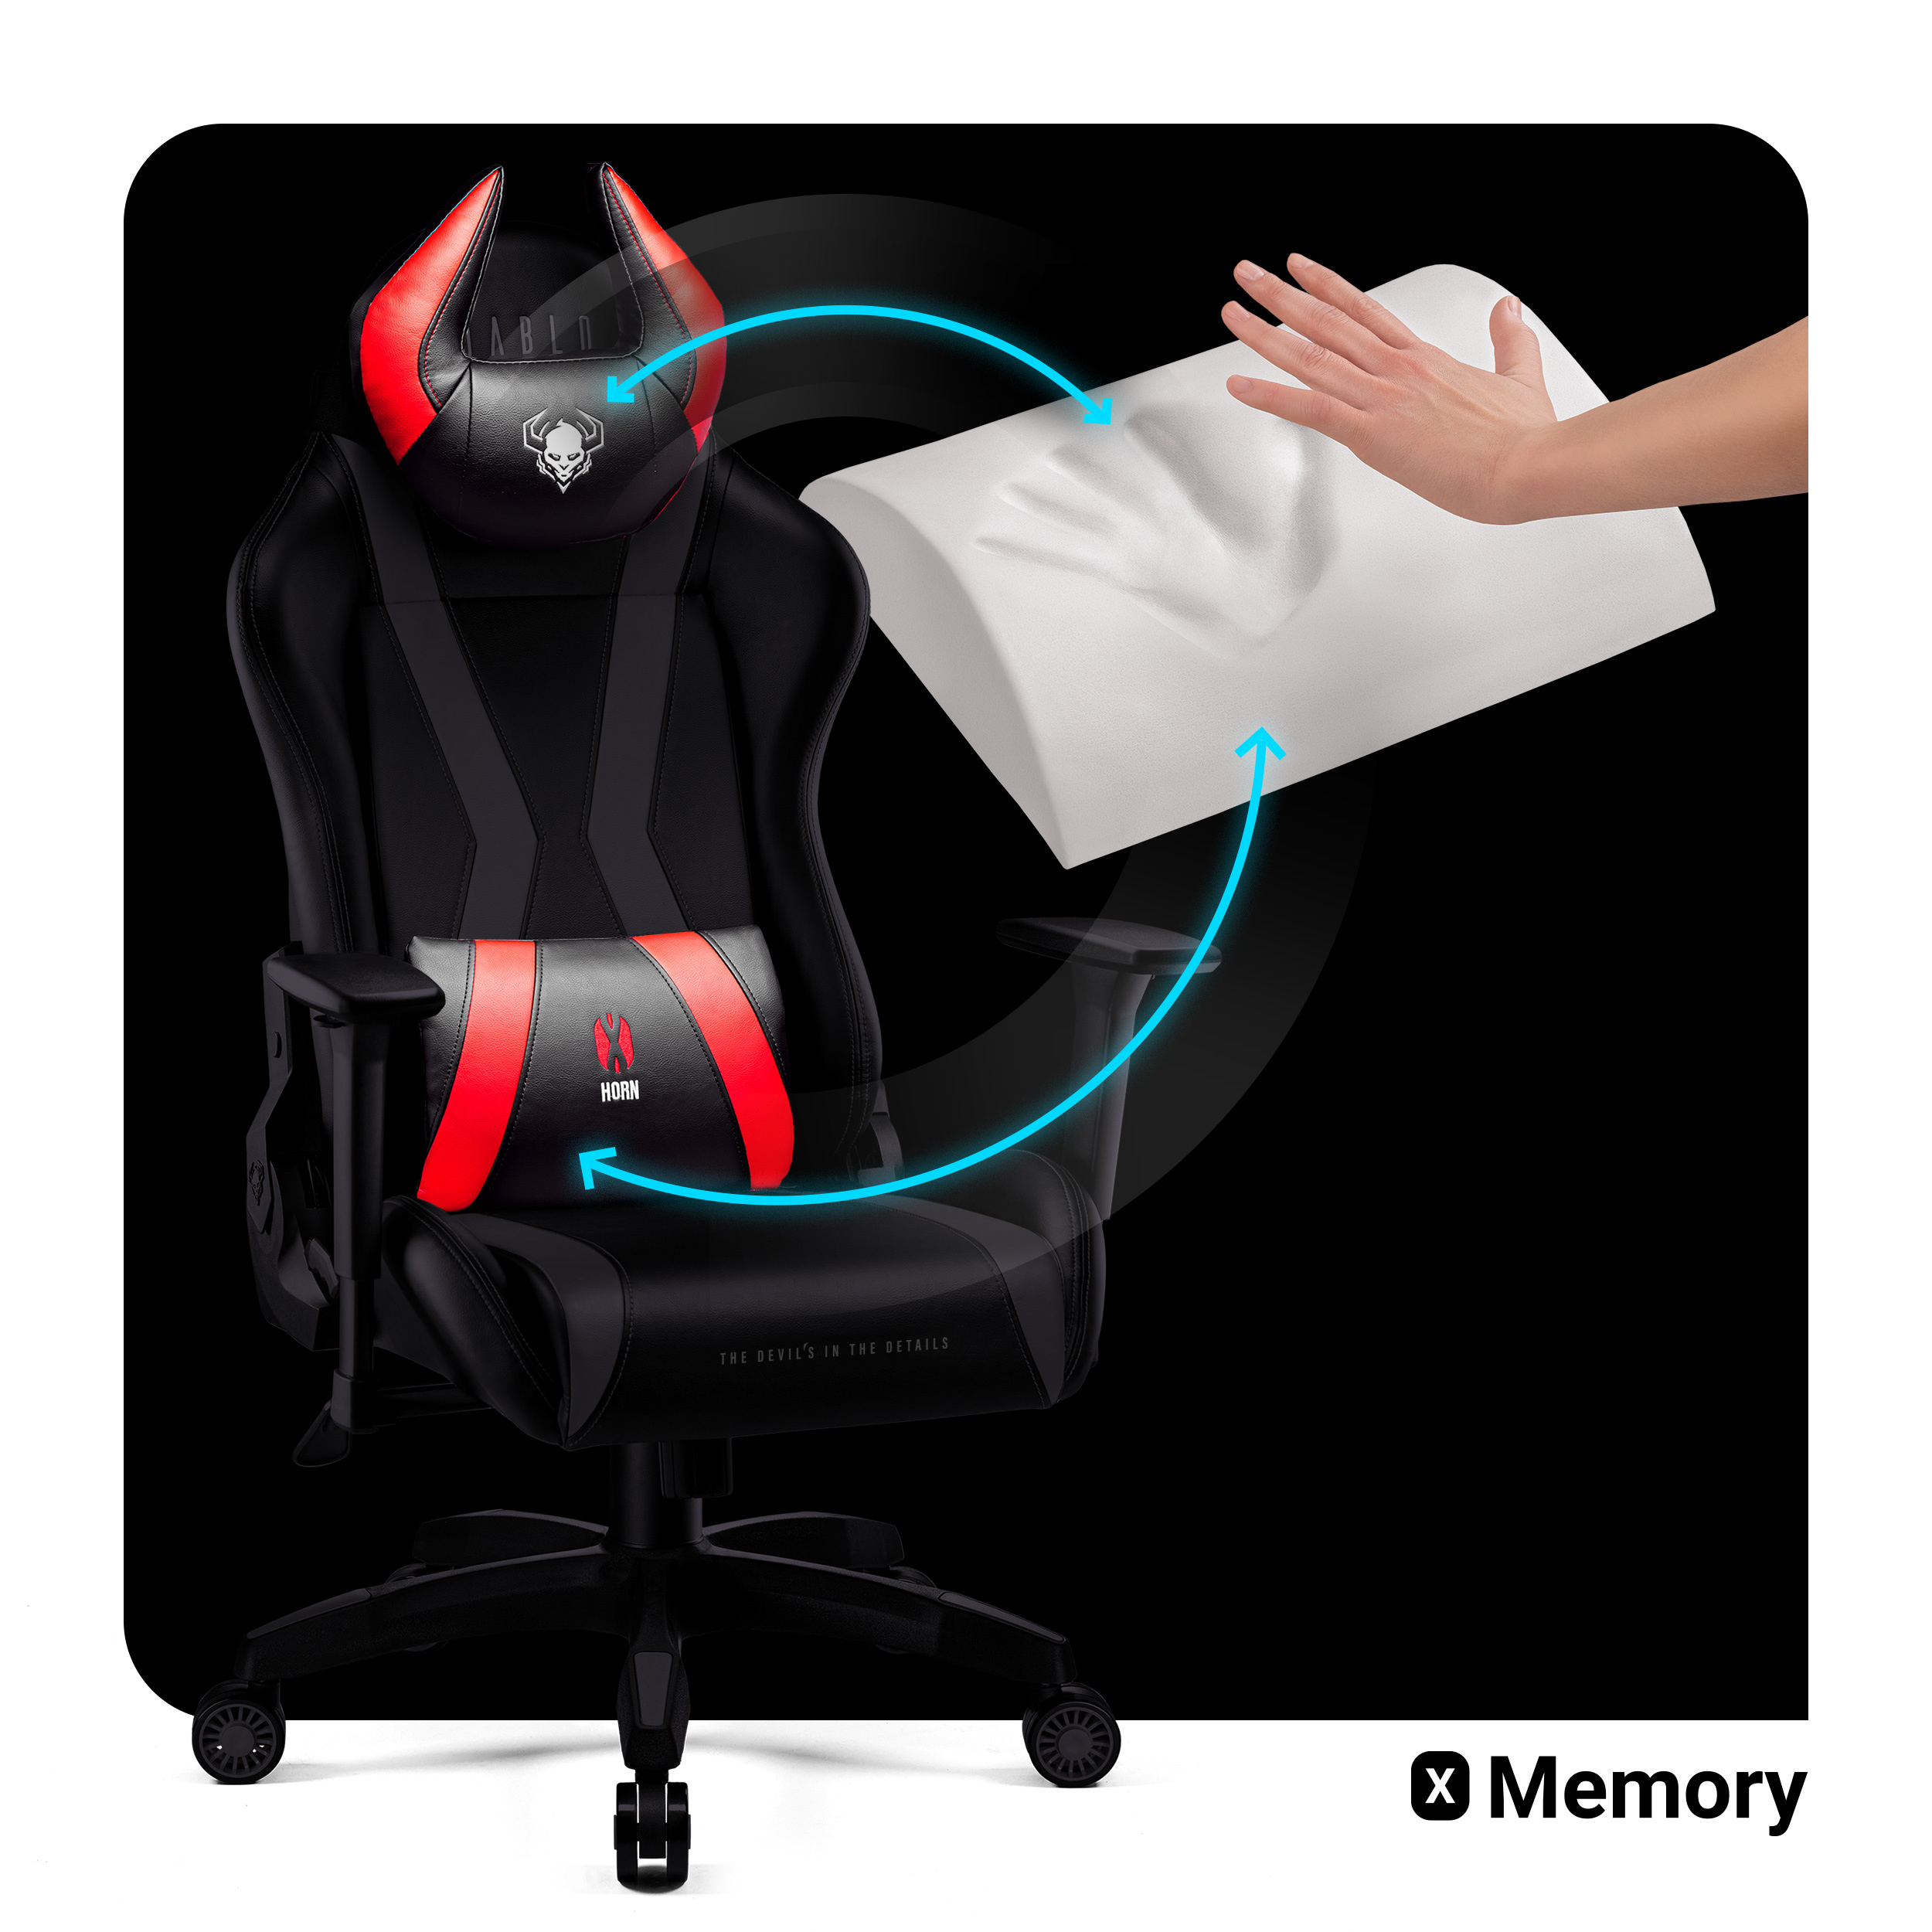 DIABLO CHAIRS GAMING Chair, Gaming black/red X-HORN NORMAL STUHL 2.0